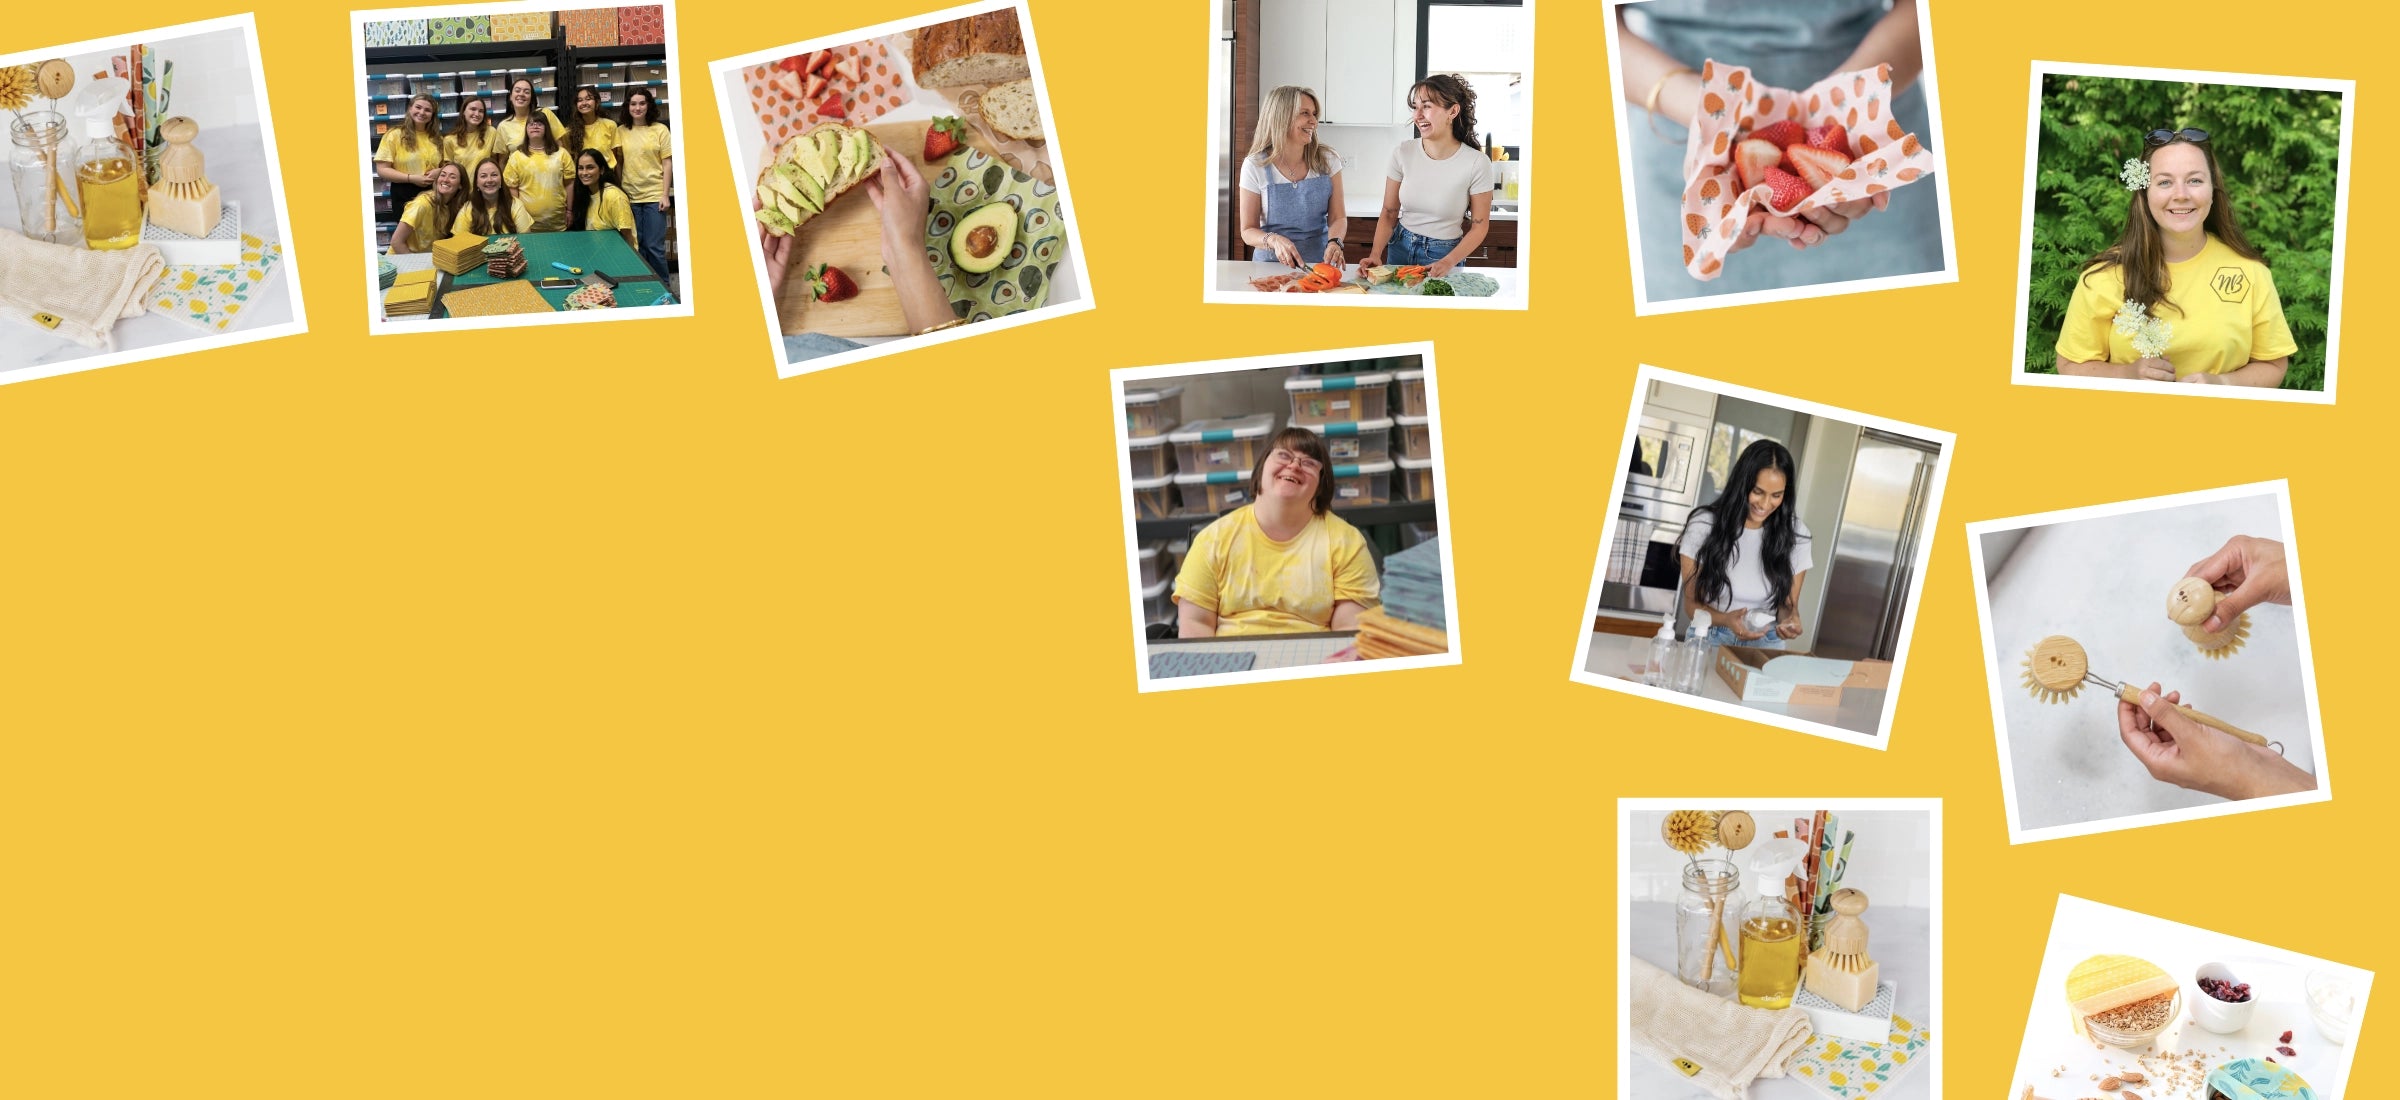 Yellow background with a series of images scattered around the top and right hand side. Images of Nature Bee products including dissolvable cleaning tablets, beeswax wraps and Swedish dishcloths. The nature bee team and products in use are photographed. Join the nature bee hive rewards and referral program to earn points, share with friends and redeem for discounts and free shipping!